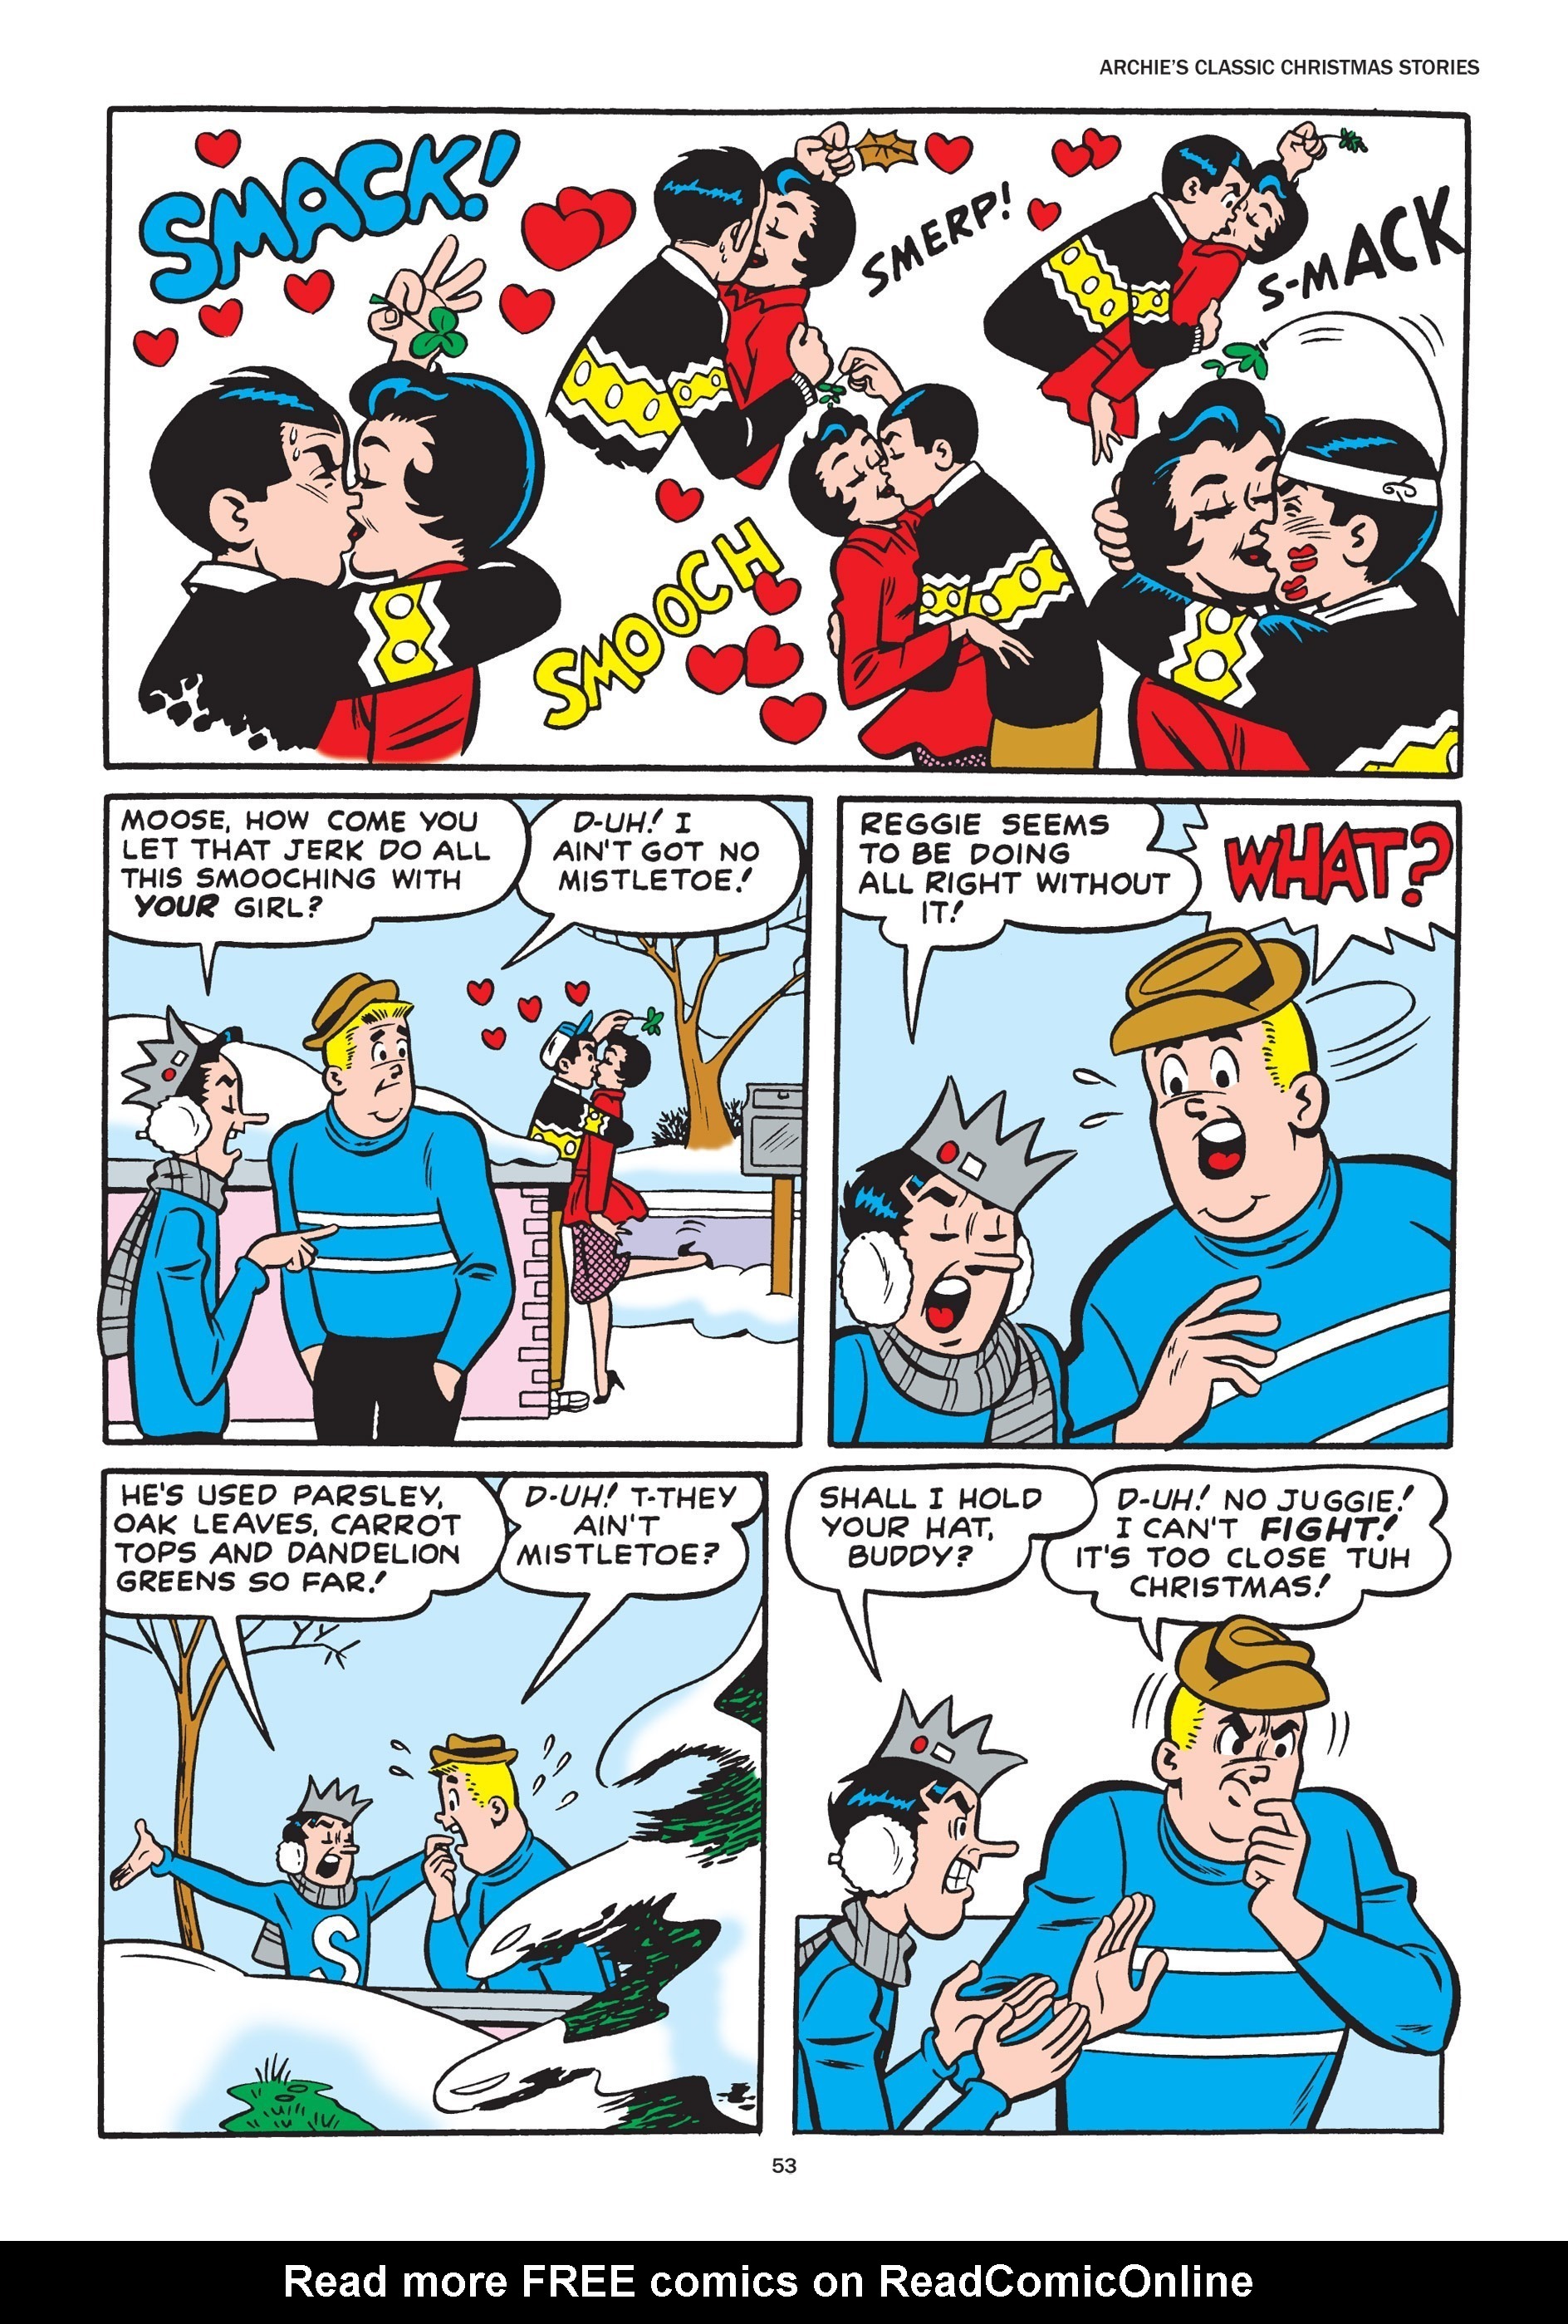 Read online Archie's Classic Christmas Stories comic -  Issue # TPB - 54